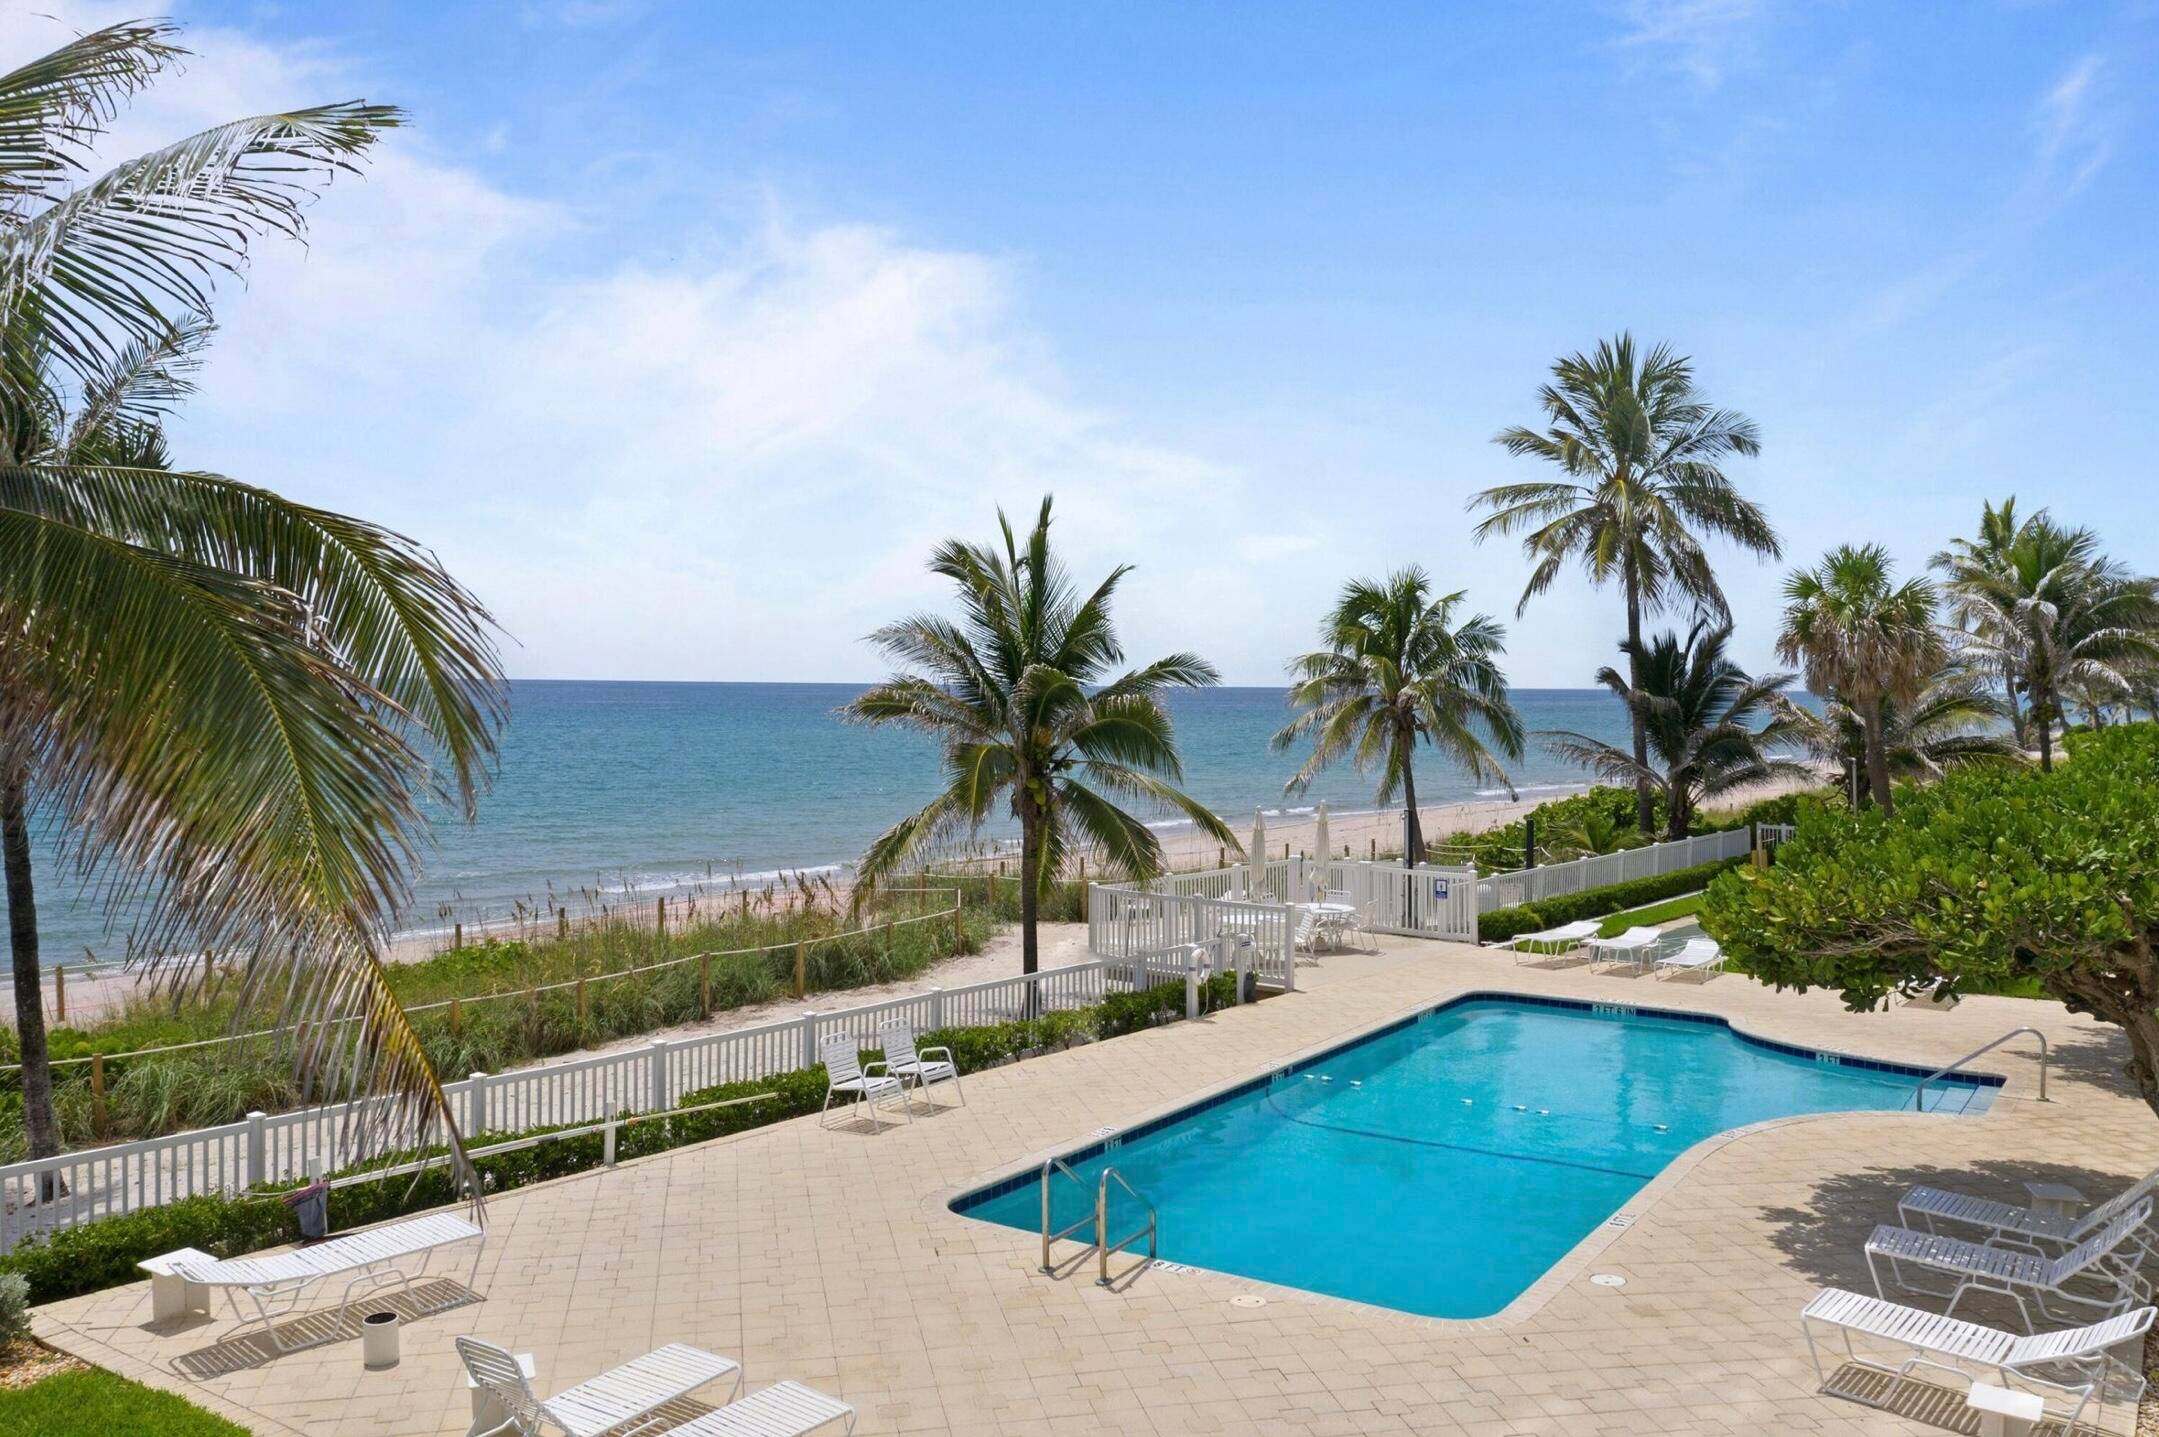 Stunning 2 2 completely furnished corner condo directly on private, pristine Hillsboro Beach.